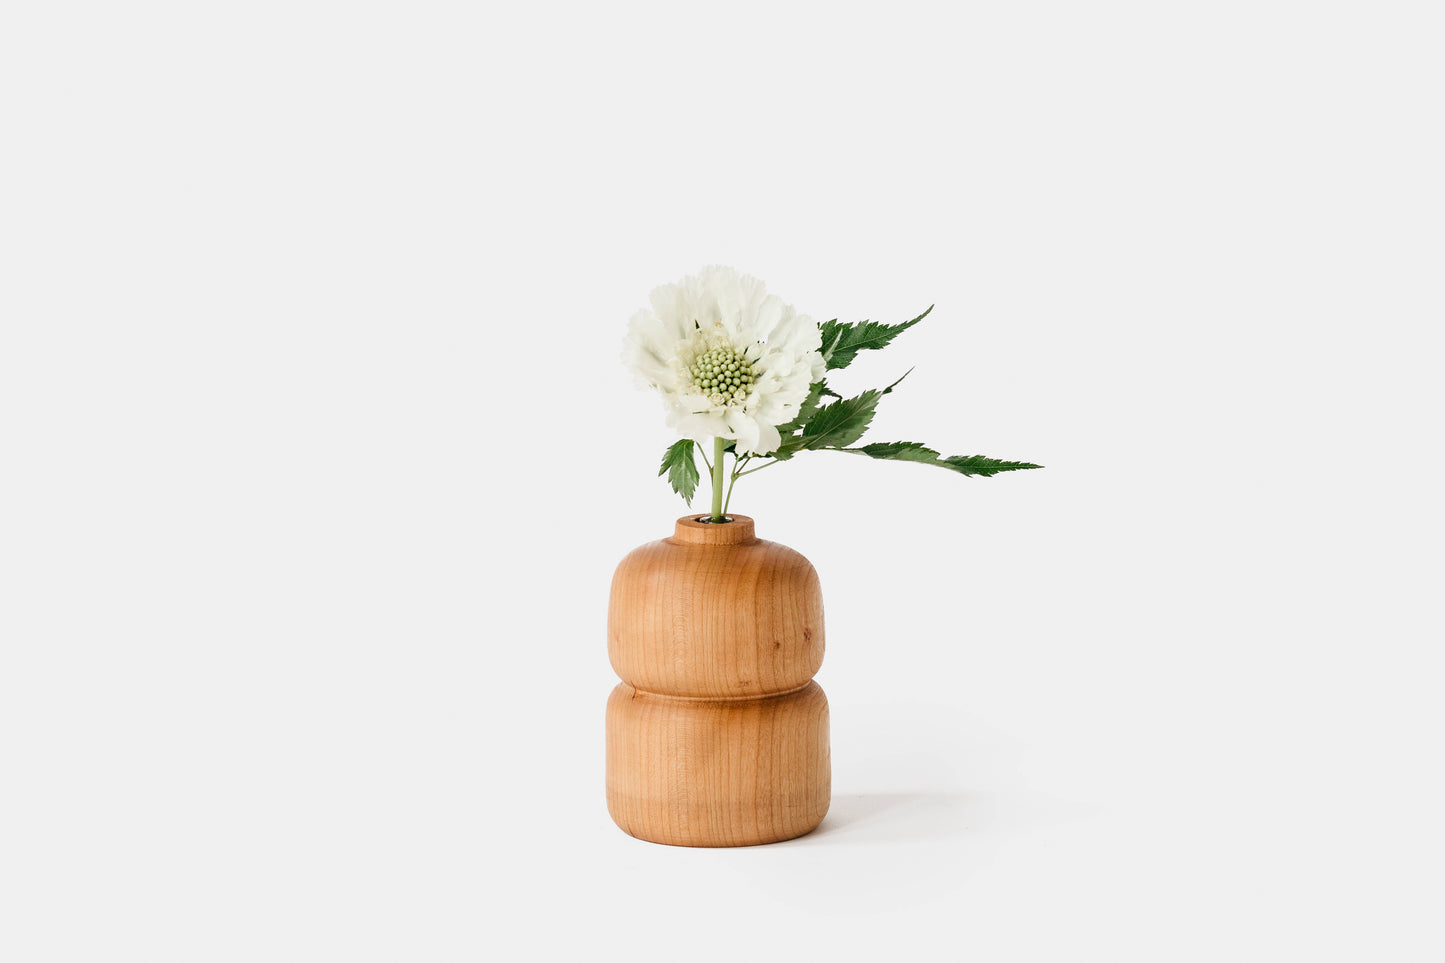 Cherry double bud vase with a white flower. By Melanie Abrantes Designs.